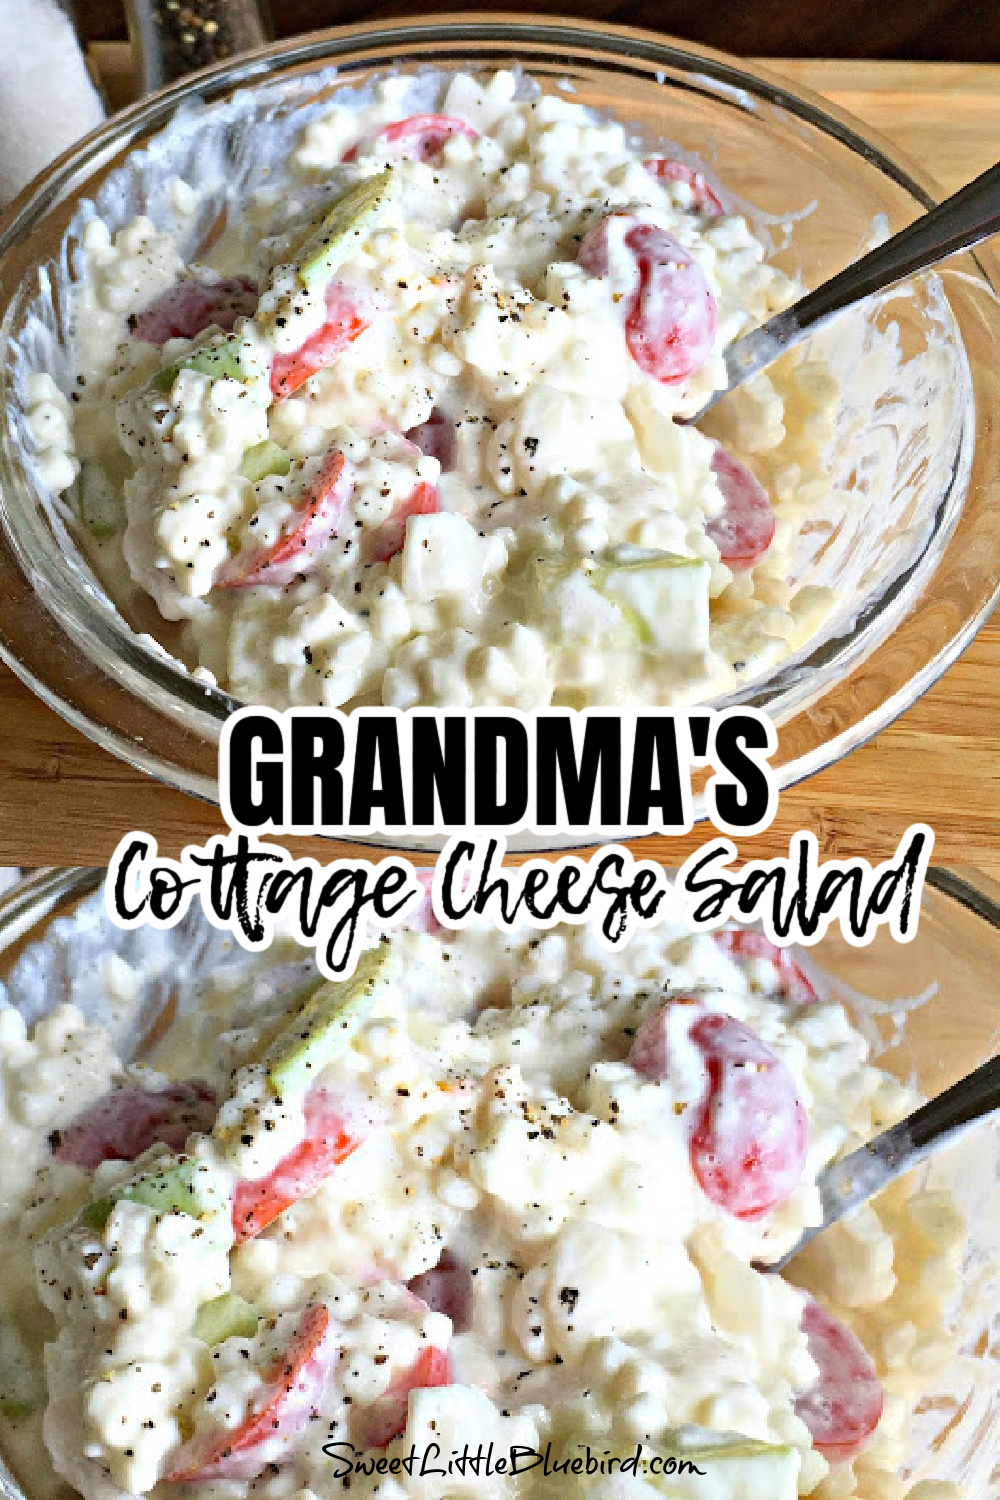 This is a two photo collage showing Grandma's Cottage Cheese Salad Collage in a clear mixing bowl with a spoon.